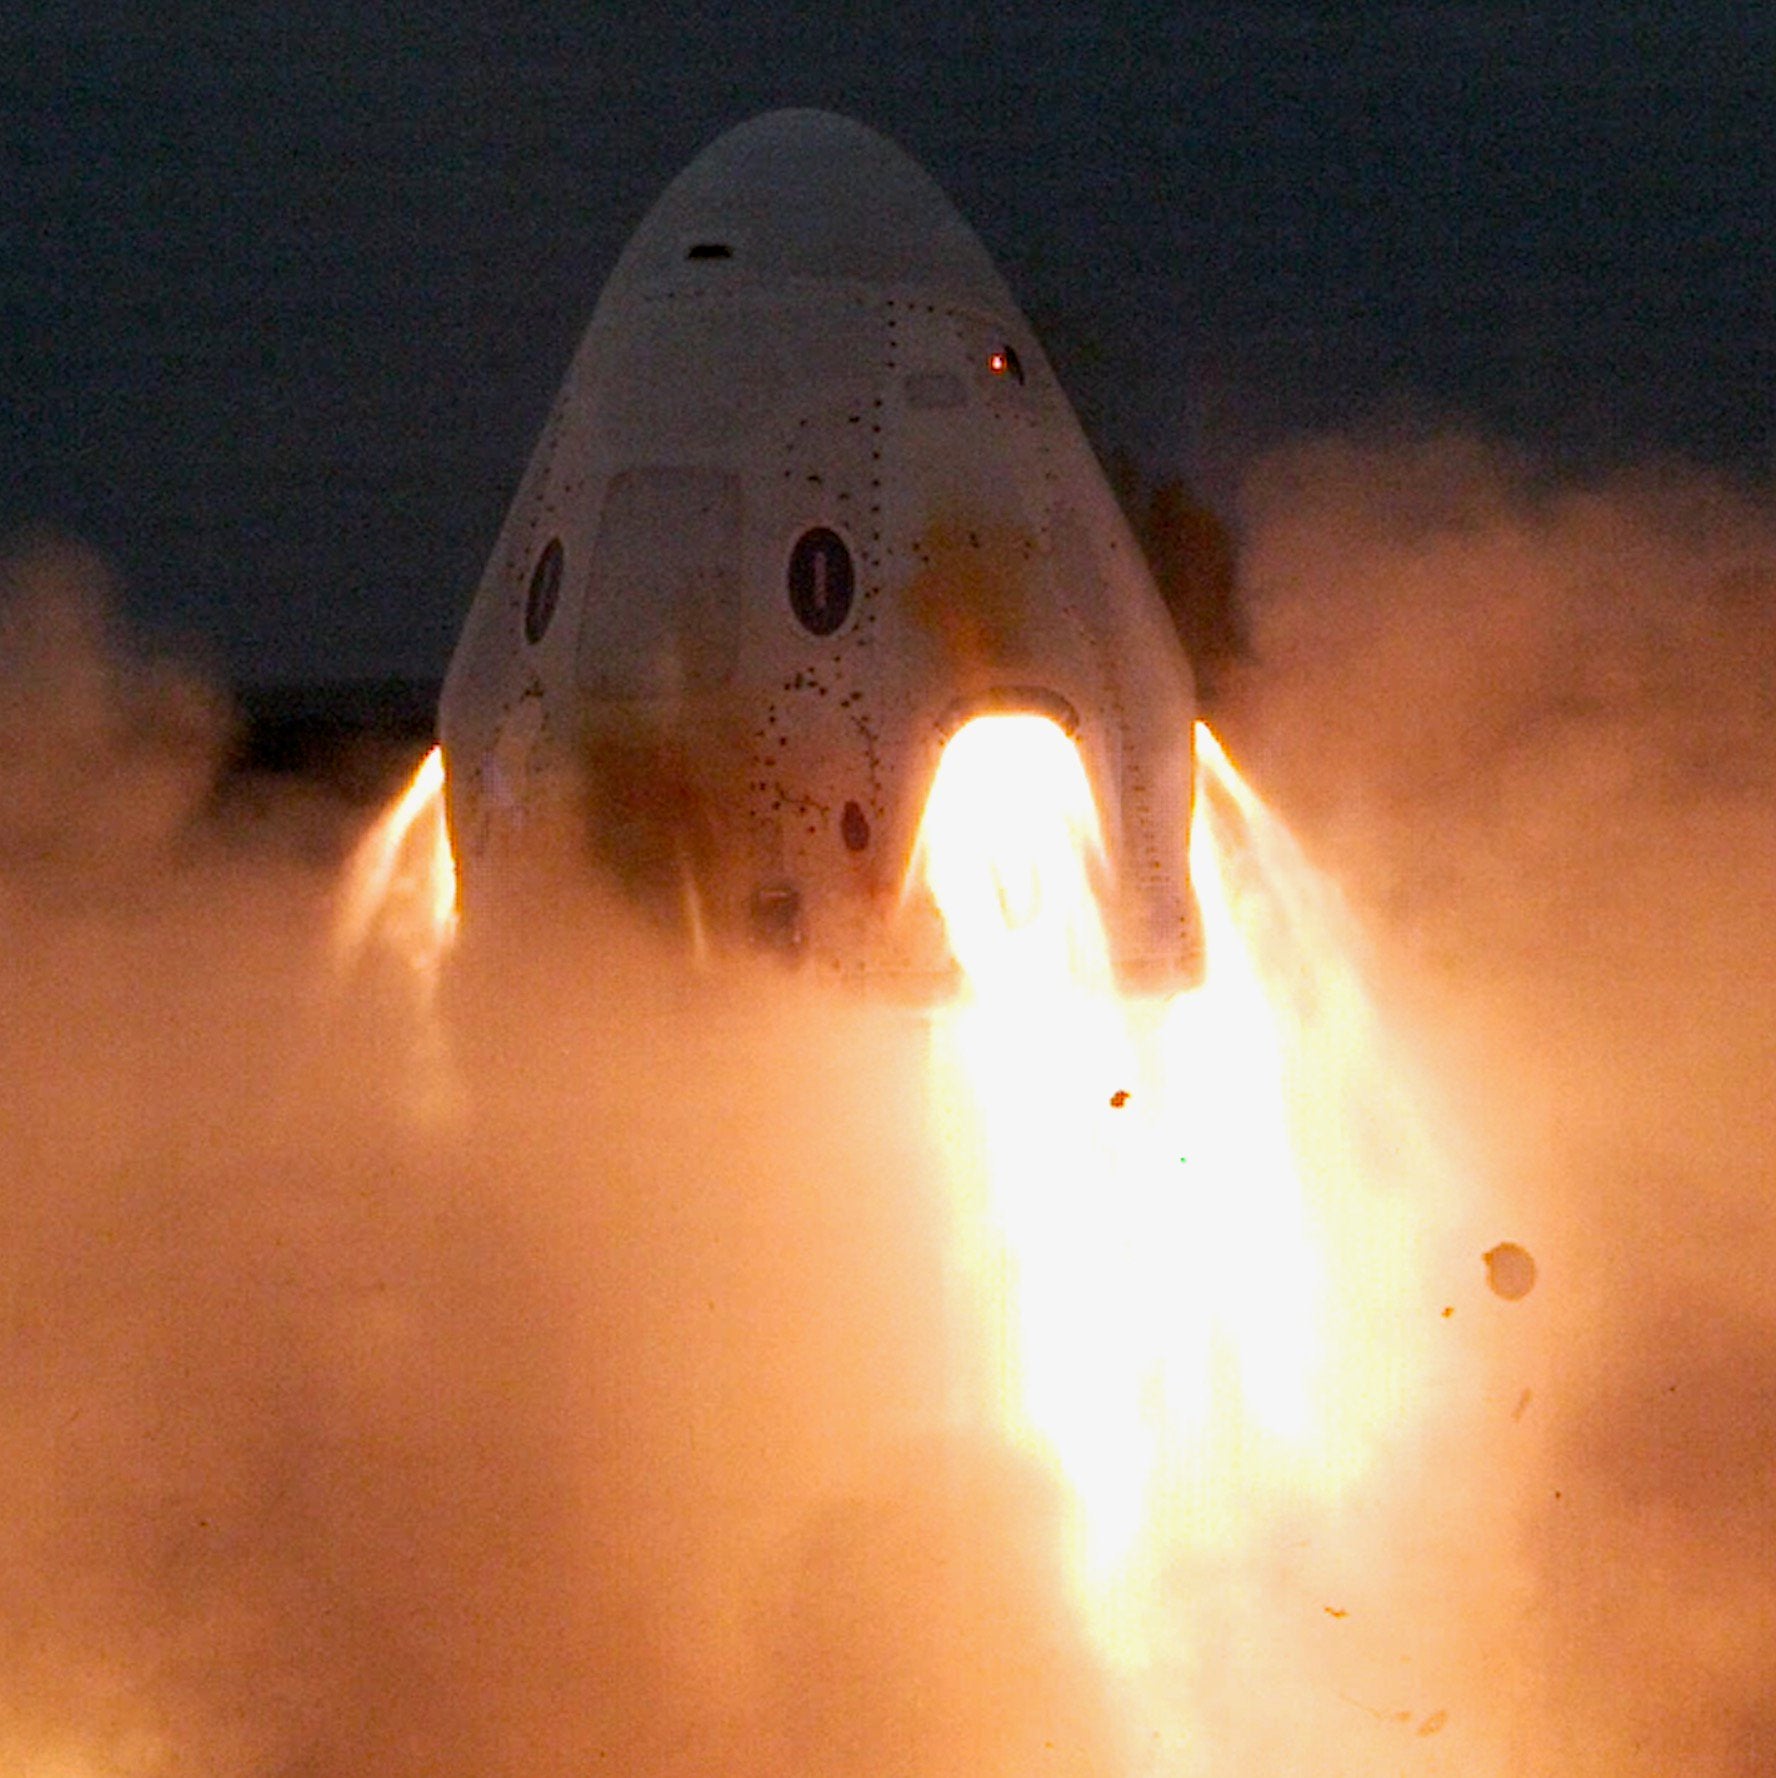 SpaceX Crew Dragon: SuperDraco engines successful test fire